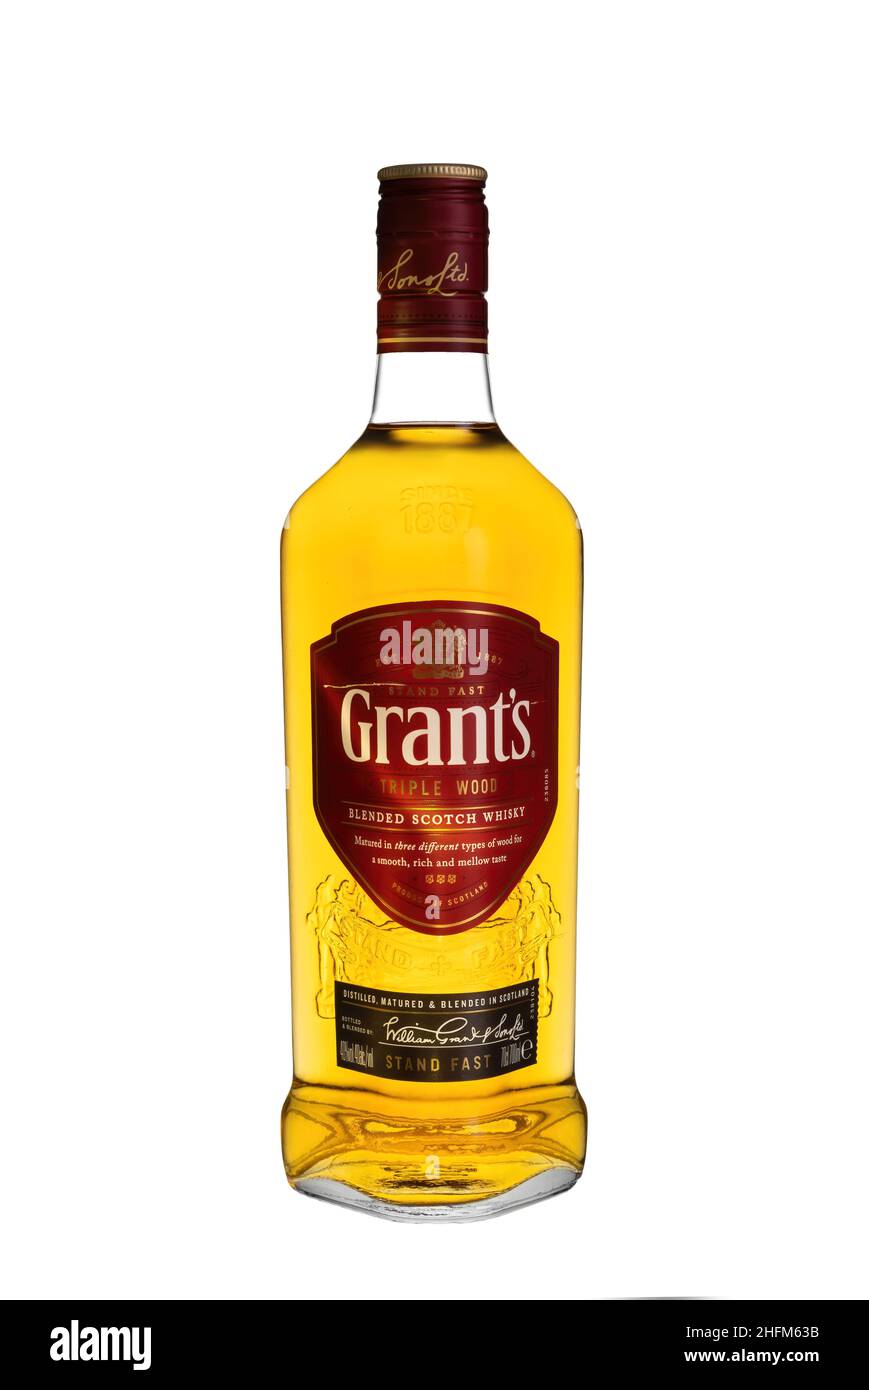 Glass bottle of Grants blended scotch whisky isolated on white background. Stock Photo